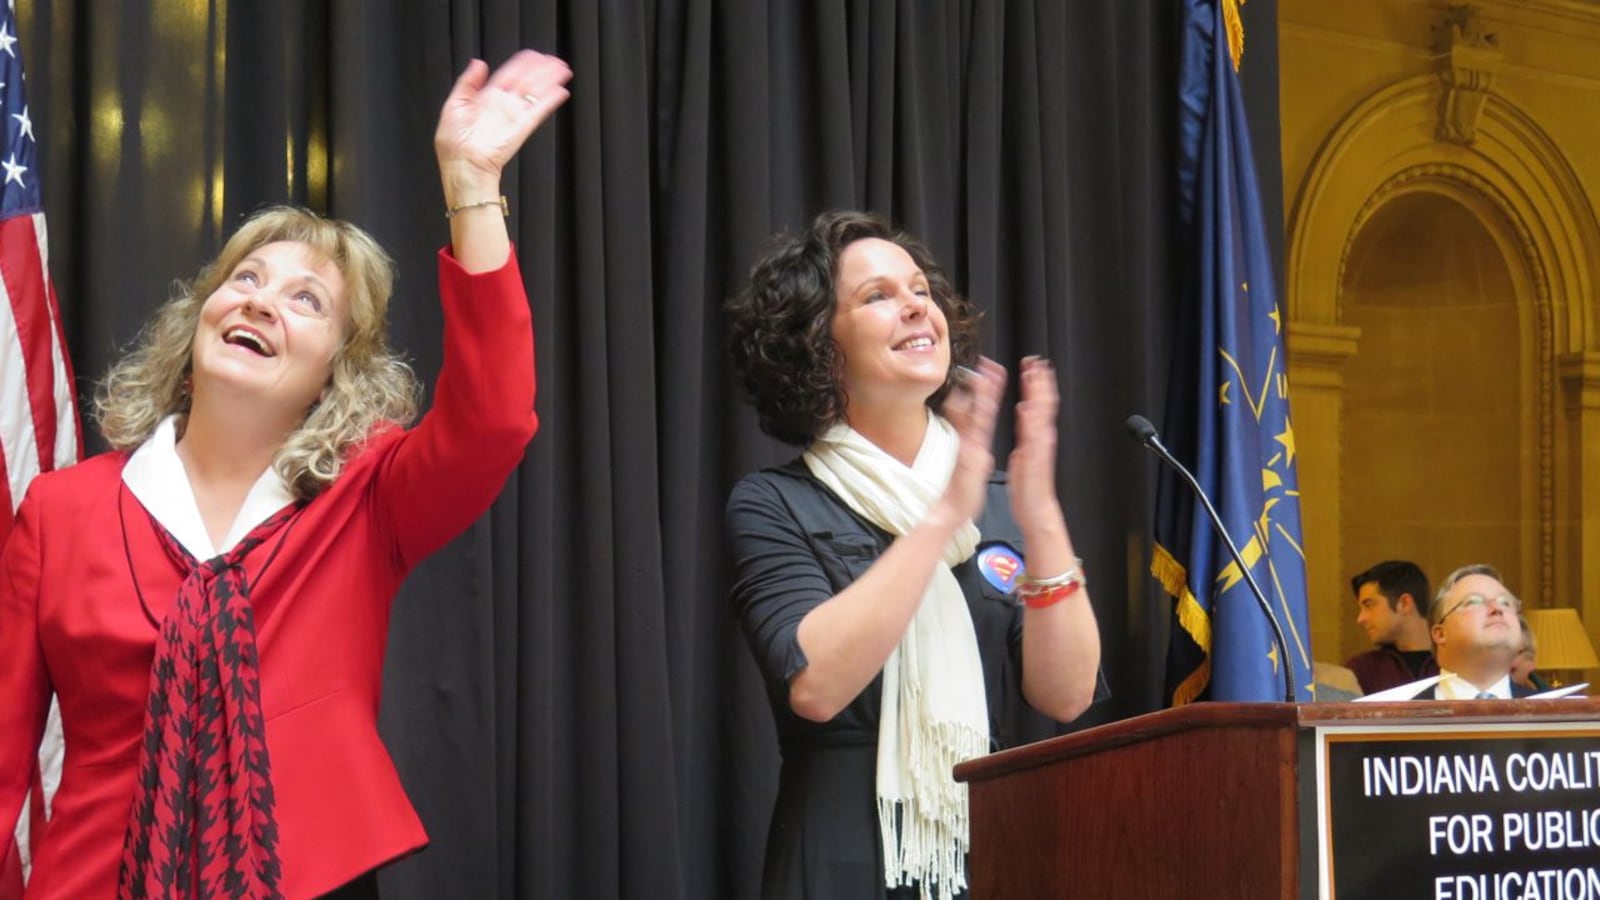 State superintendent Glenda Ritz waves to supporters on the second level of the Statehouse as she joins Marisa Graham, vice president of the Anderson teachers union, at the podium at Monday's rally.